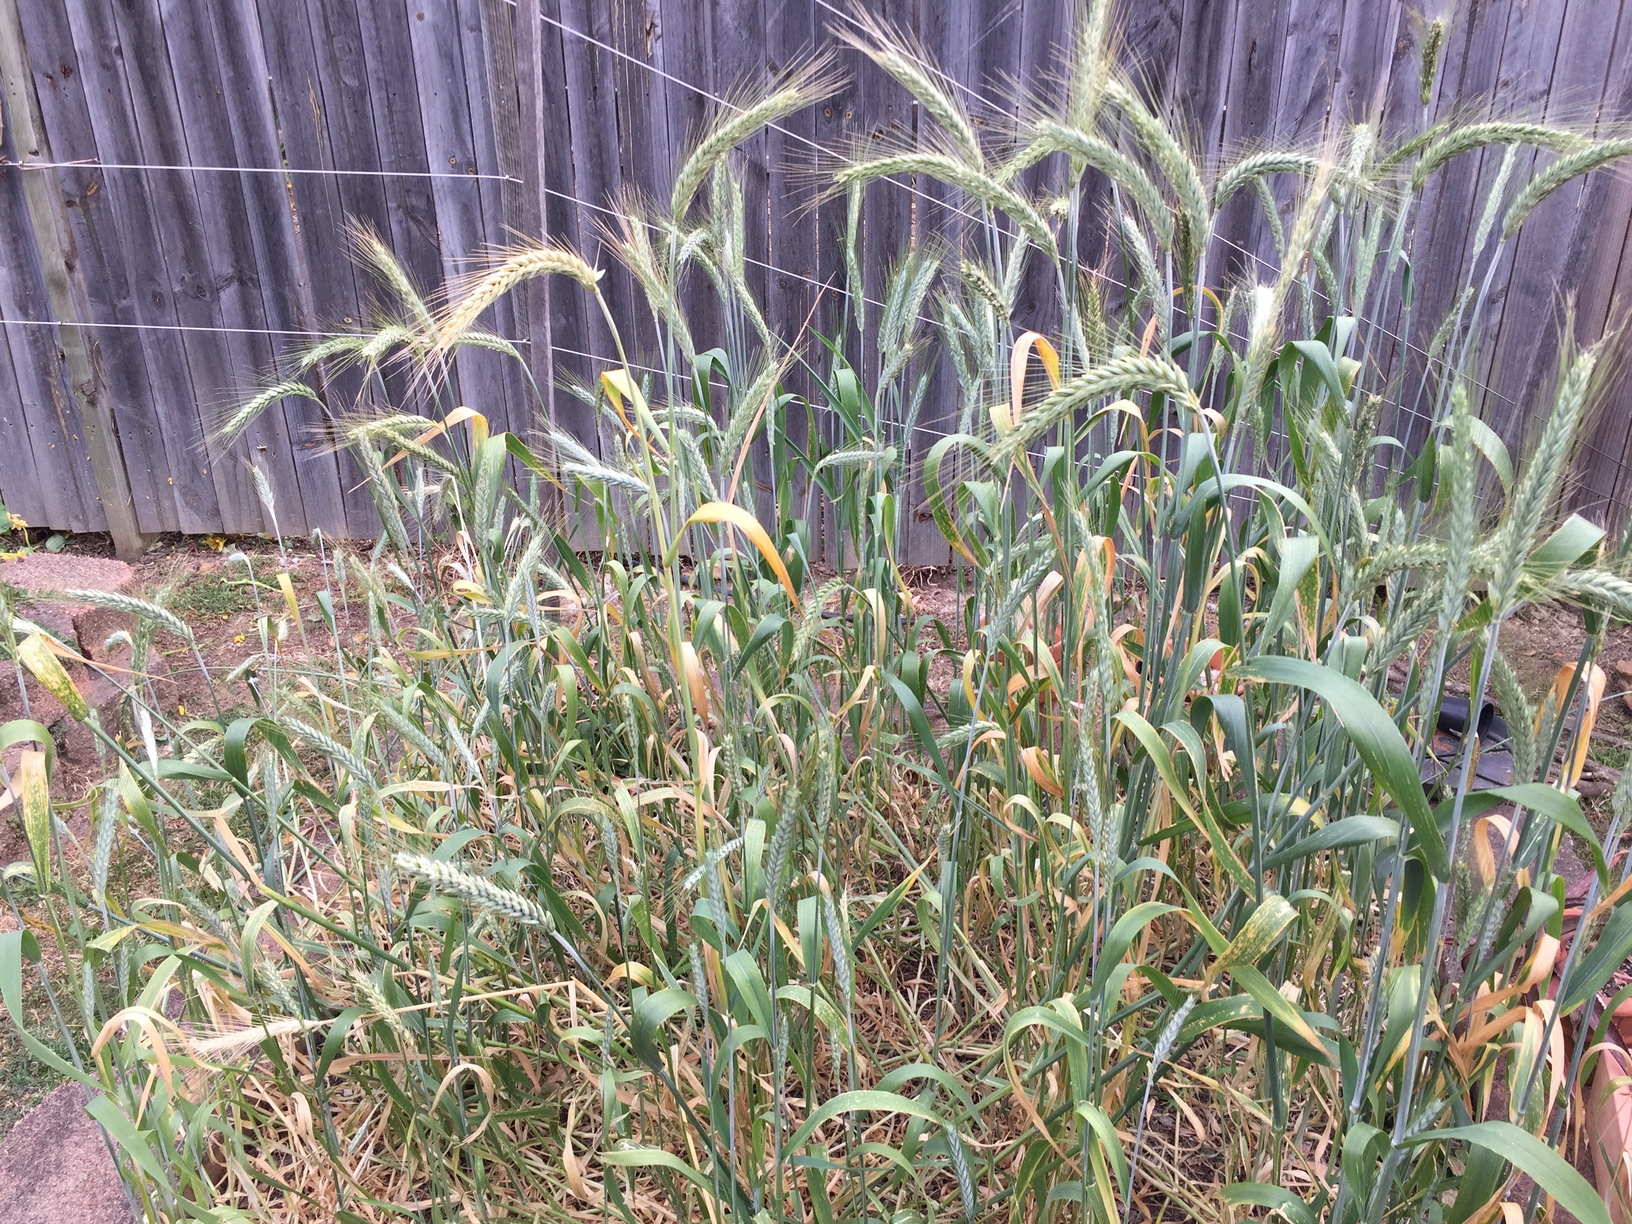 This was my first crop of wheat! It is an ancient variety called Khorasan wheat. I'll put up a more detailed post about the wheat soon.